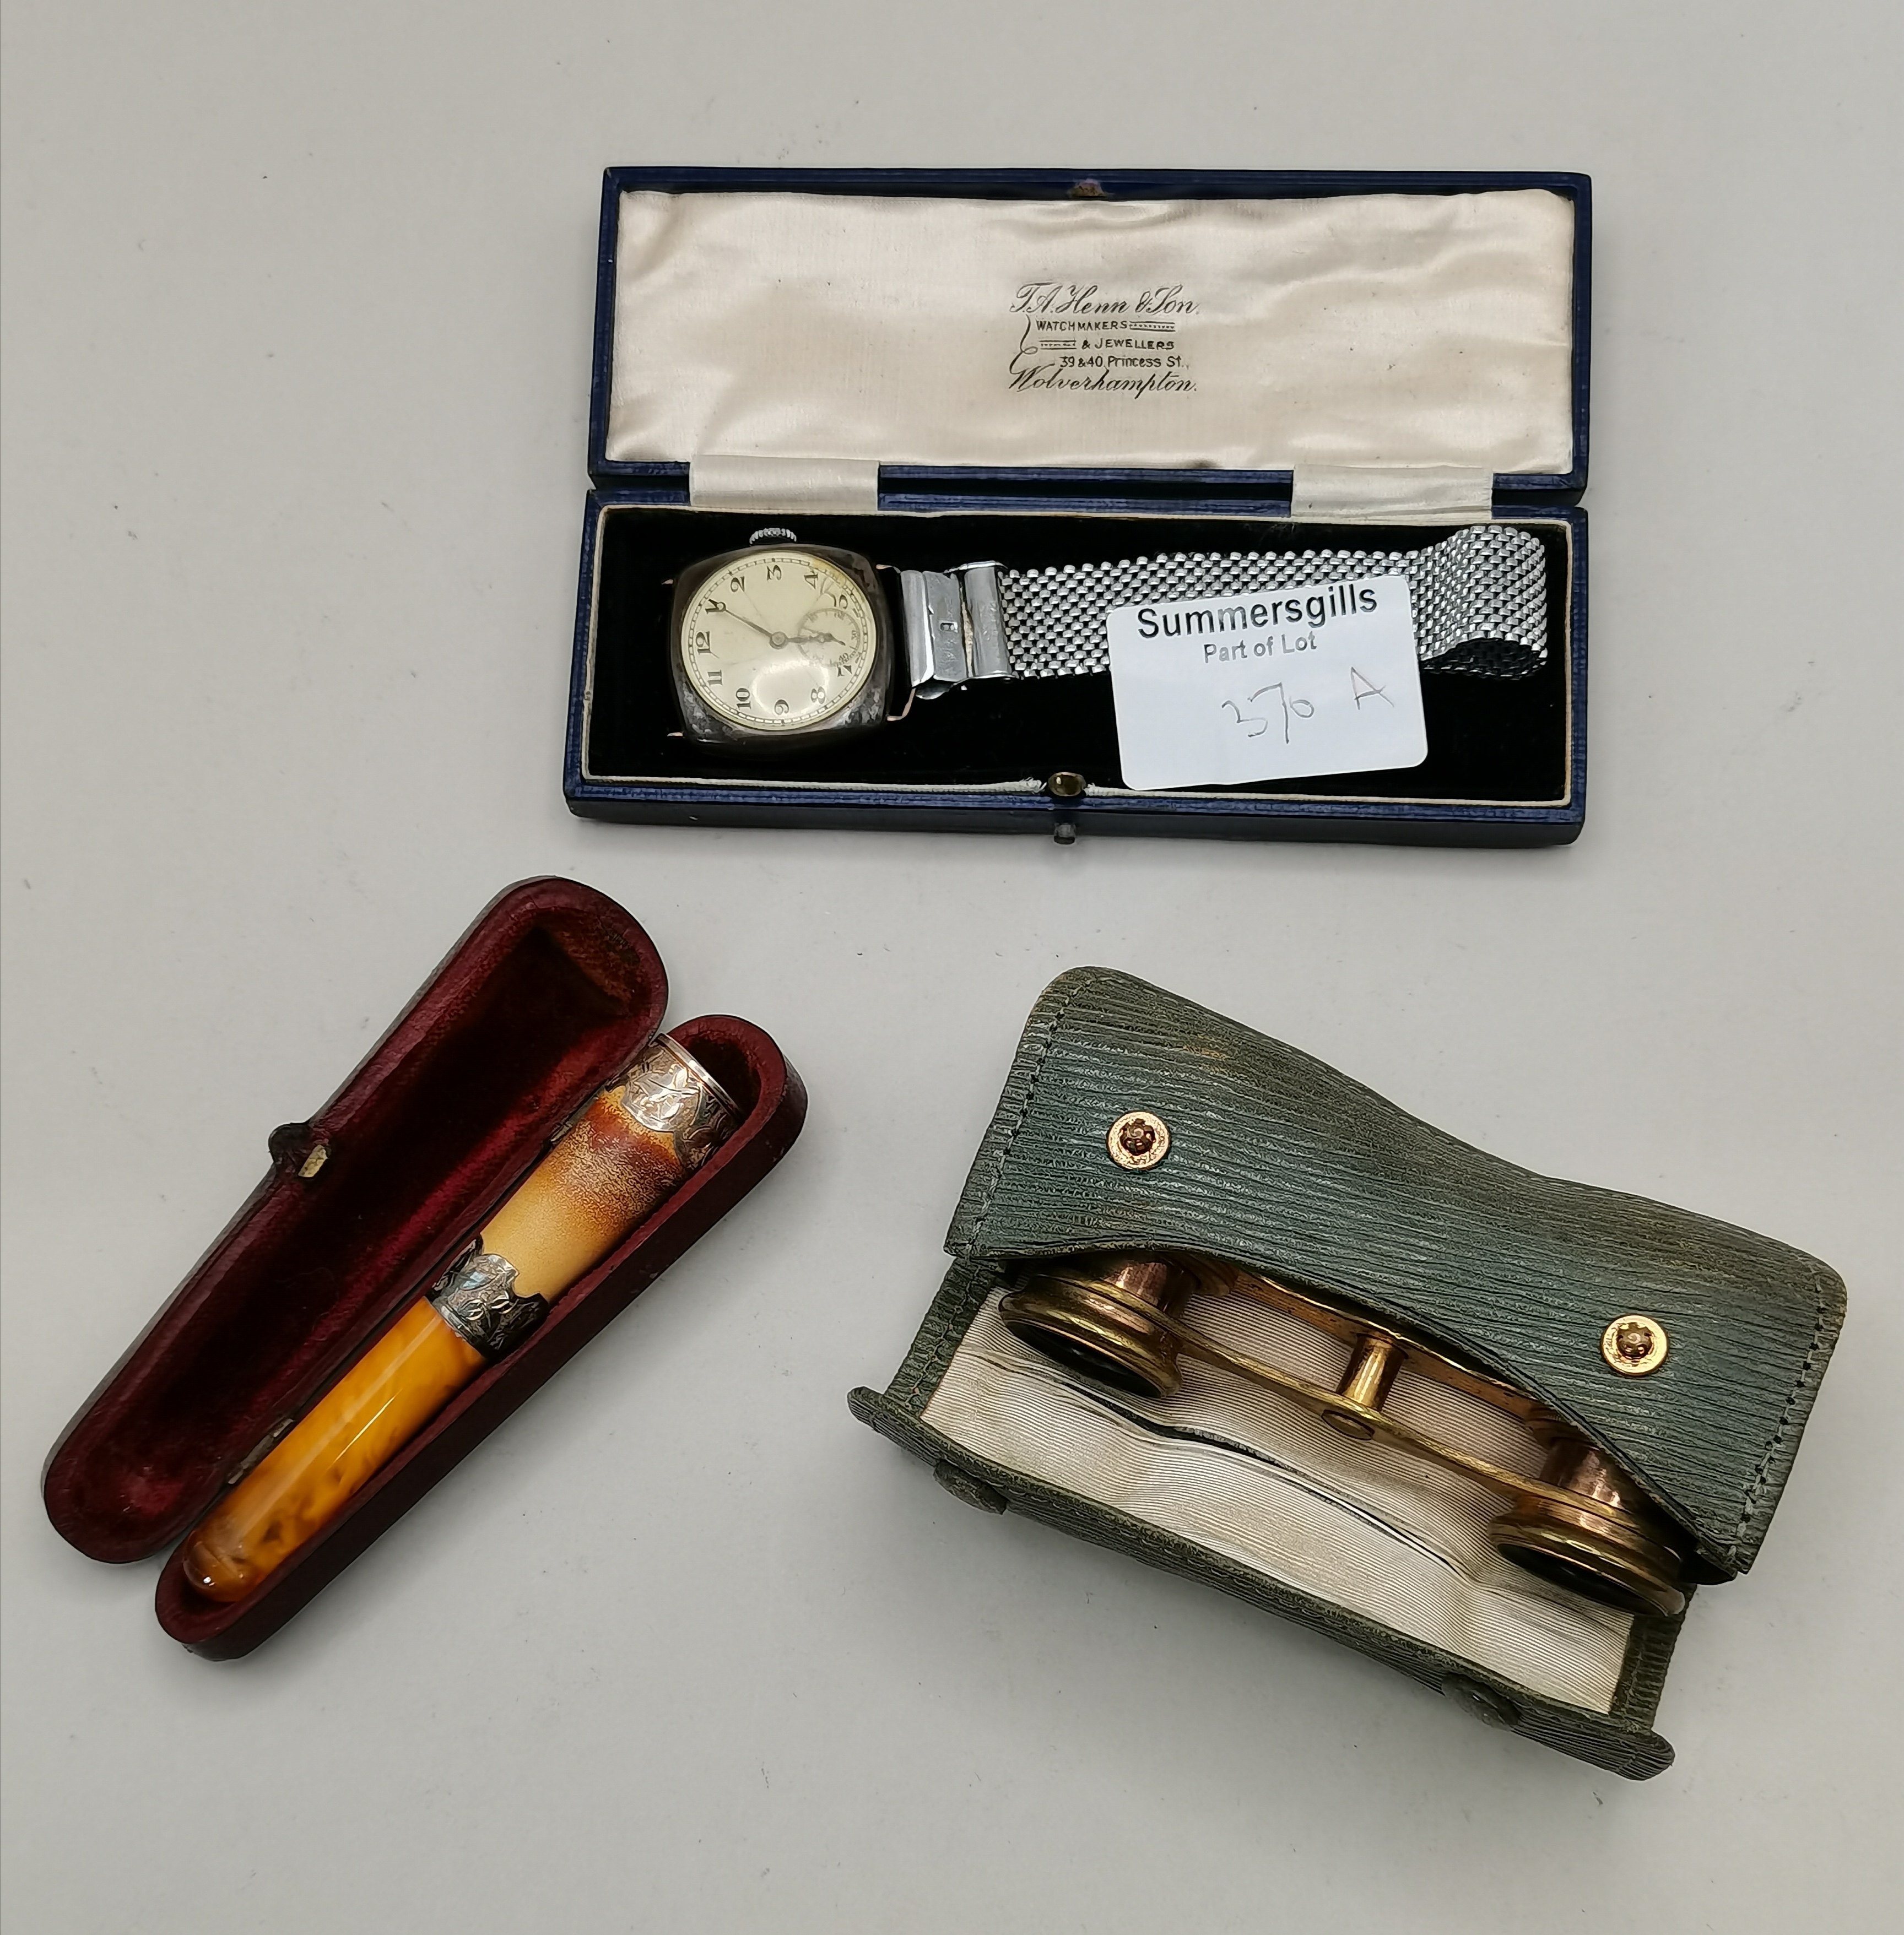 Gents silver watch , cigarette holder and pair of Opera glasses